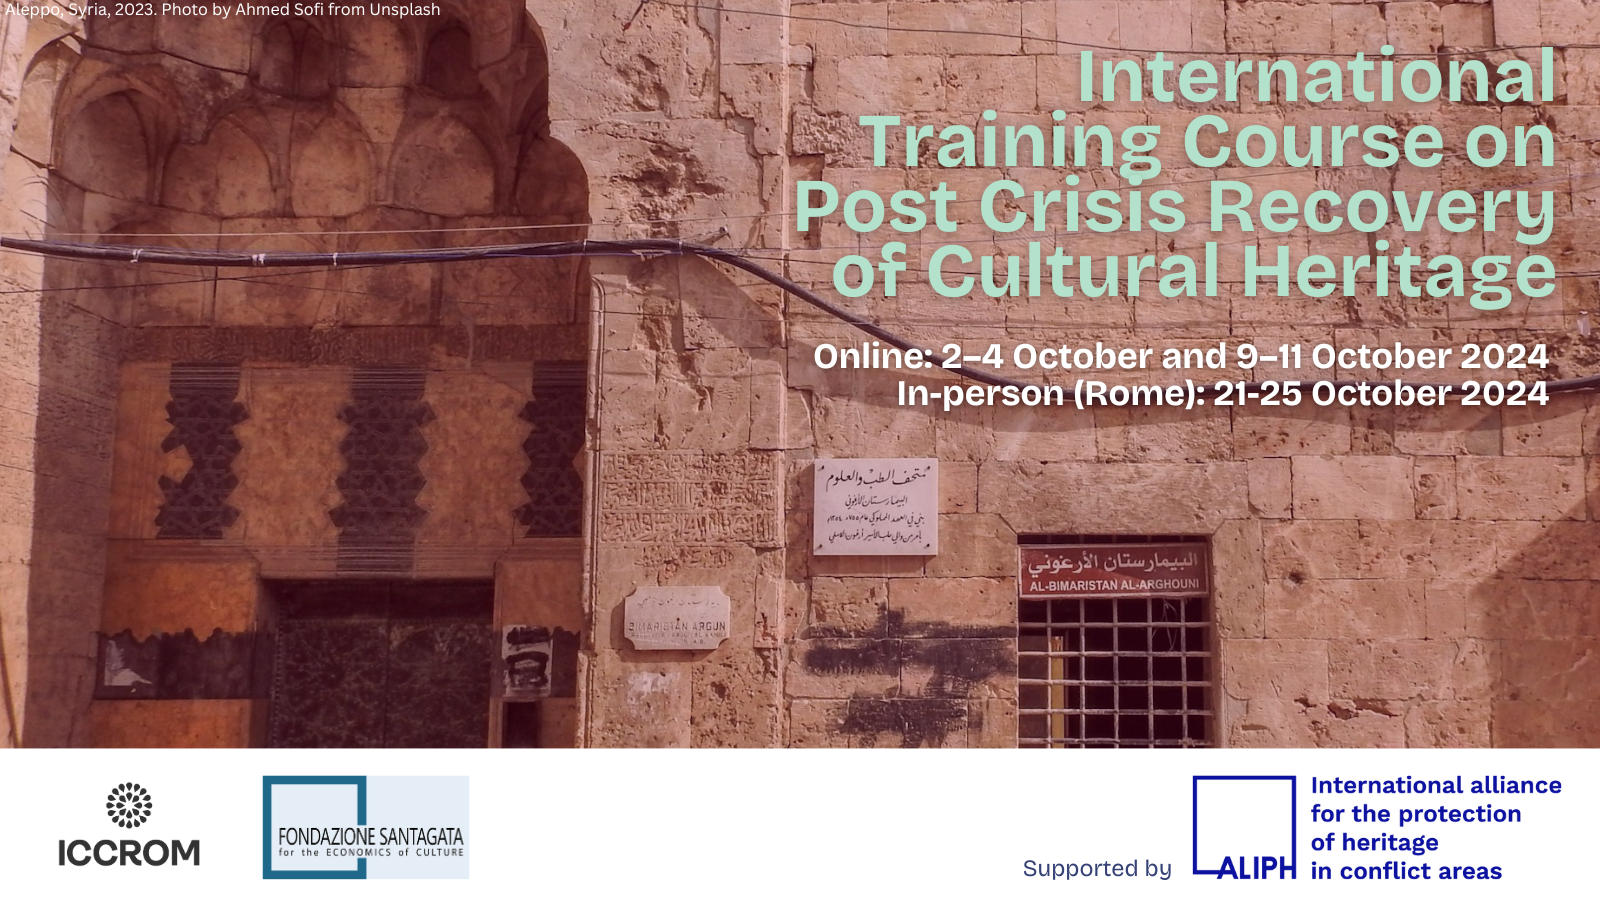 https://www.iccrom.org/courses/international-training-course-post-crisis-recovery-cultural-heritage-pcr-2024